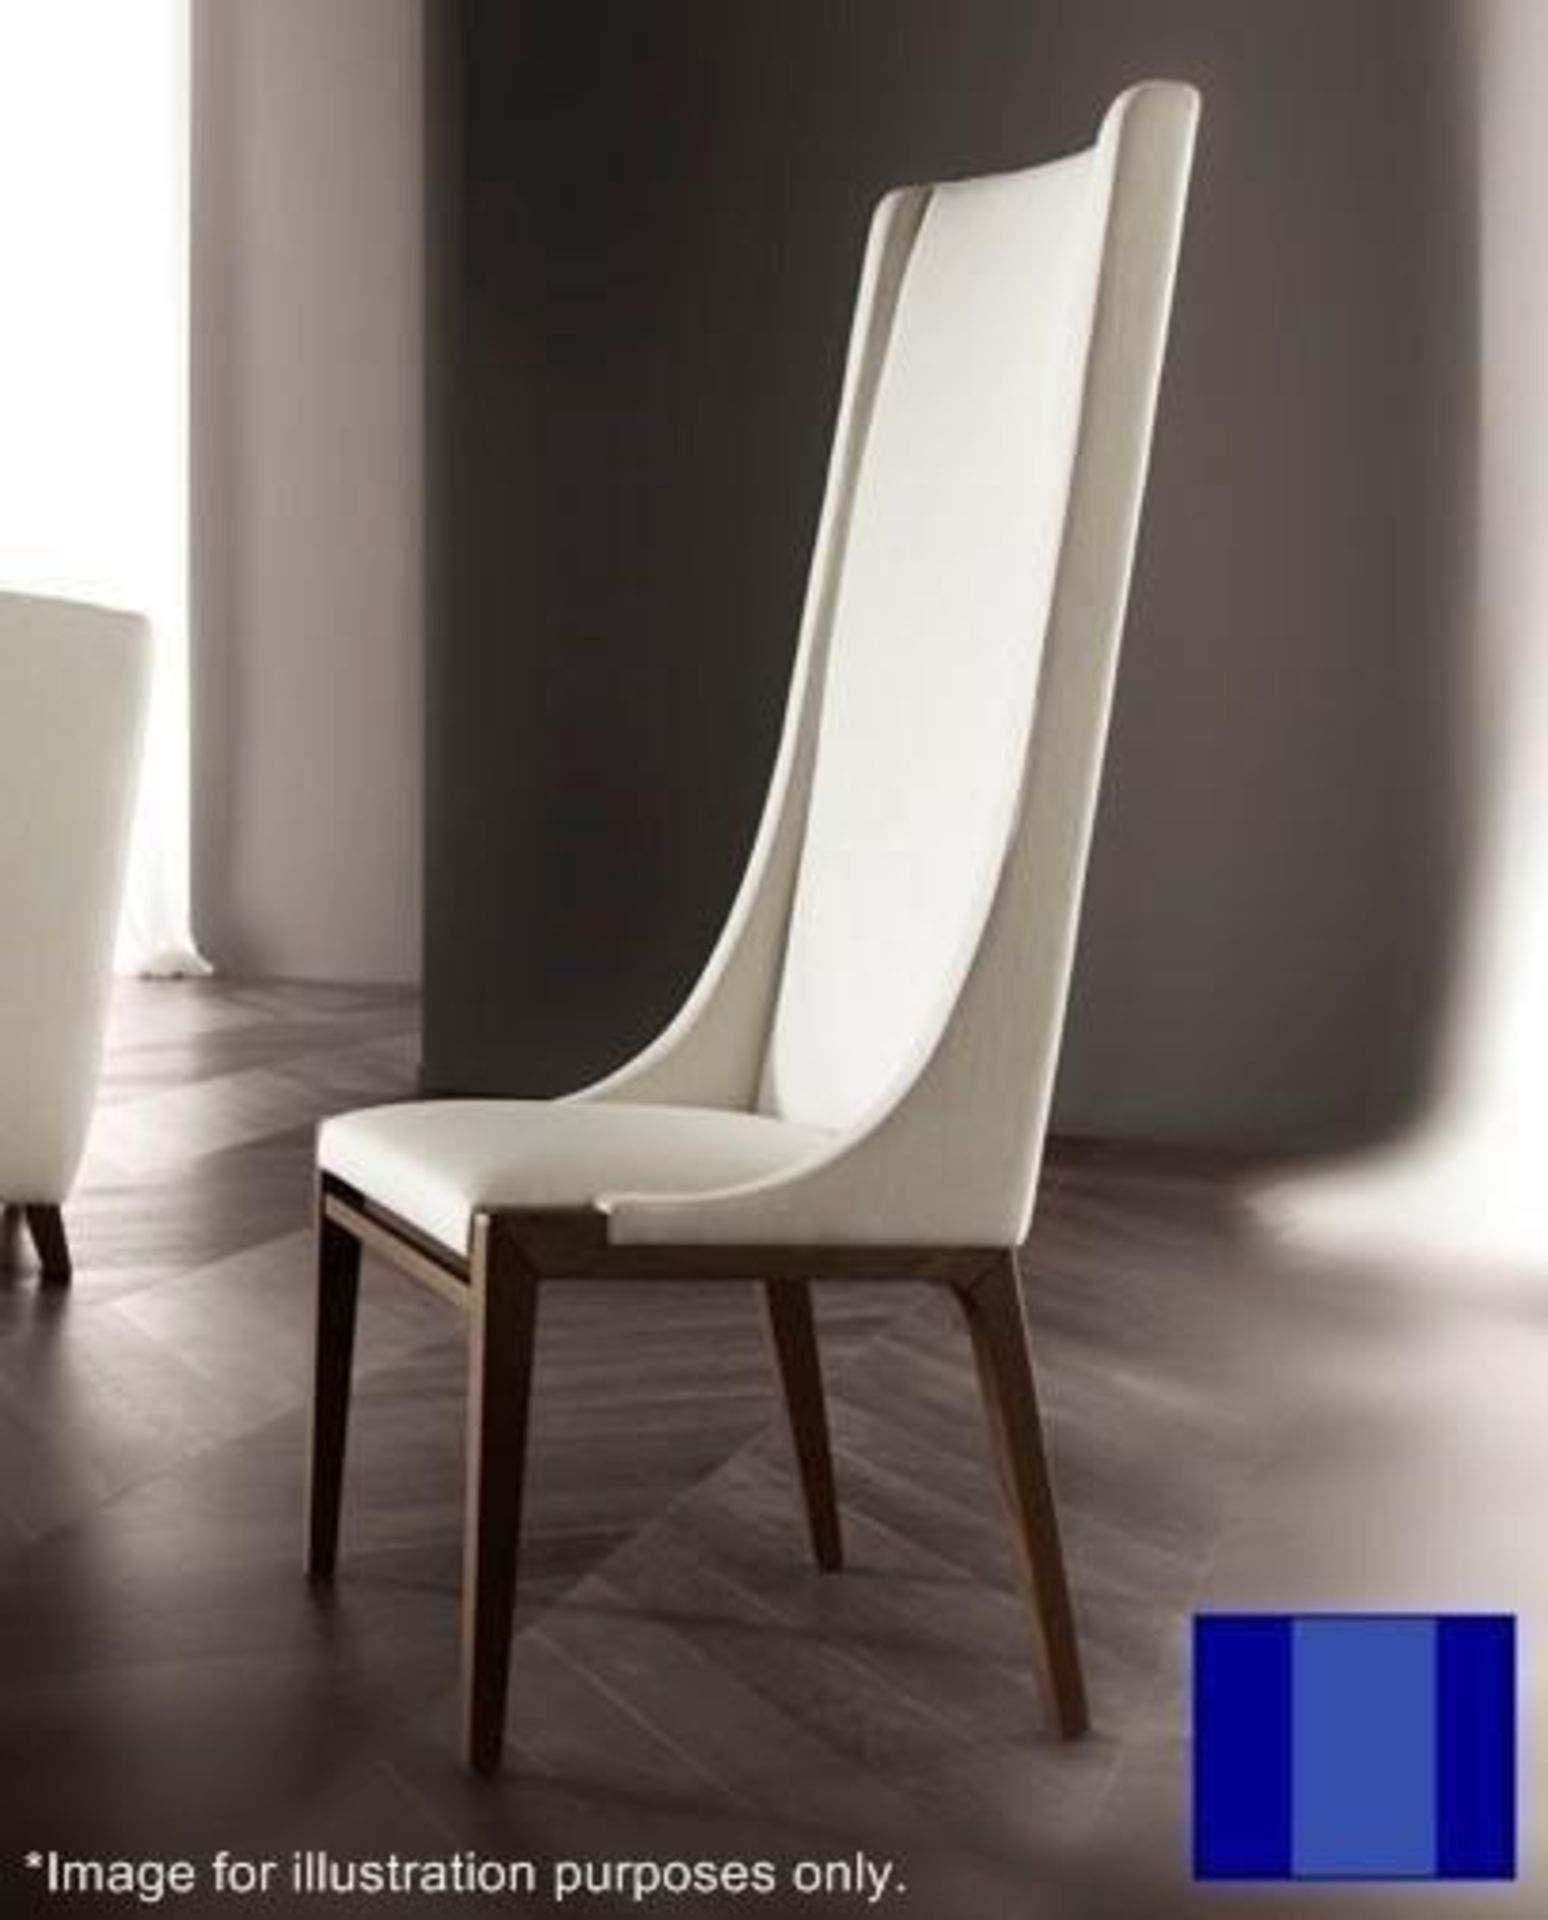 1 x KESTERPORT "Sempre" High Back Side Chair - Dimensions: H137 x W53 x D53cm, Seat Height 47cm - Re